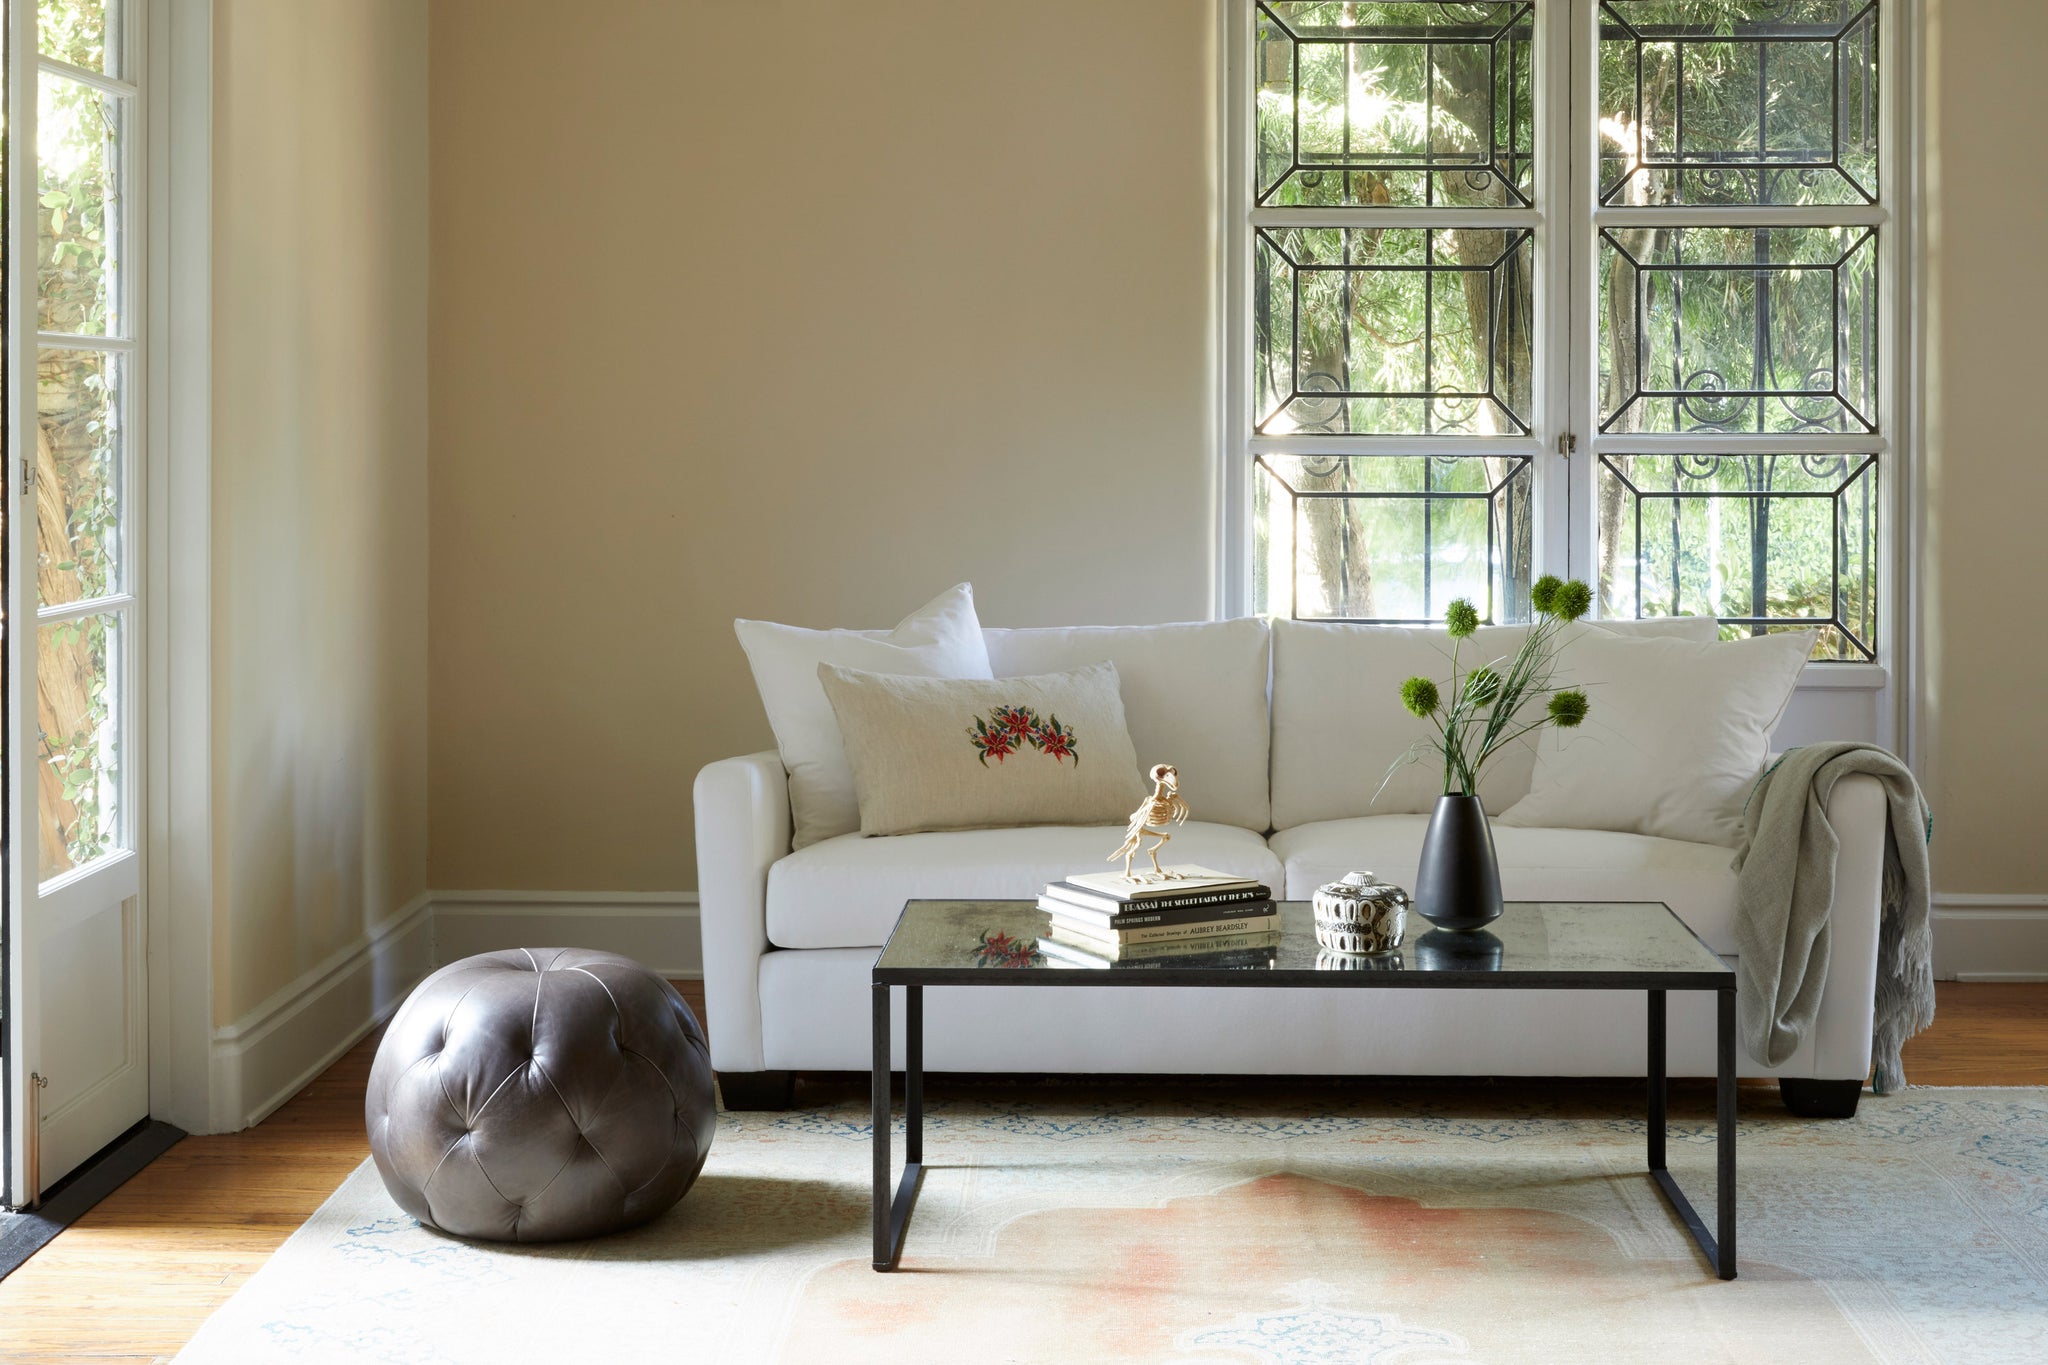  Sunset sofa upholstered in Denim White in a bright living room. A large window is behind the sofa and a leather pouf is on the side. A rectangular coffee table is in front with books and flowers on top.  Photographed in Denim White. 